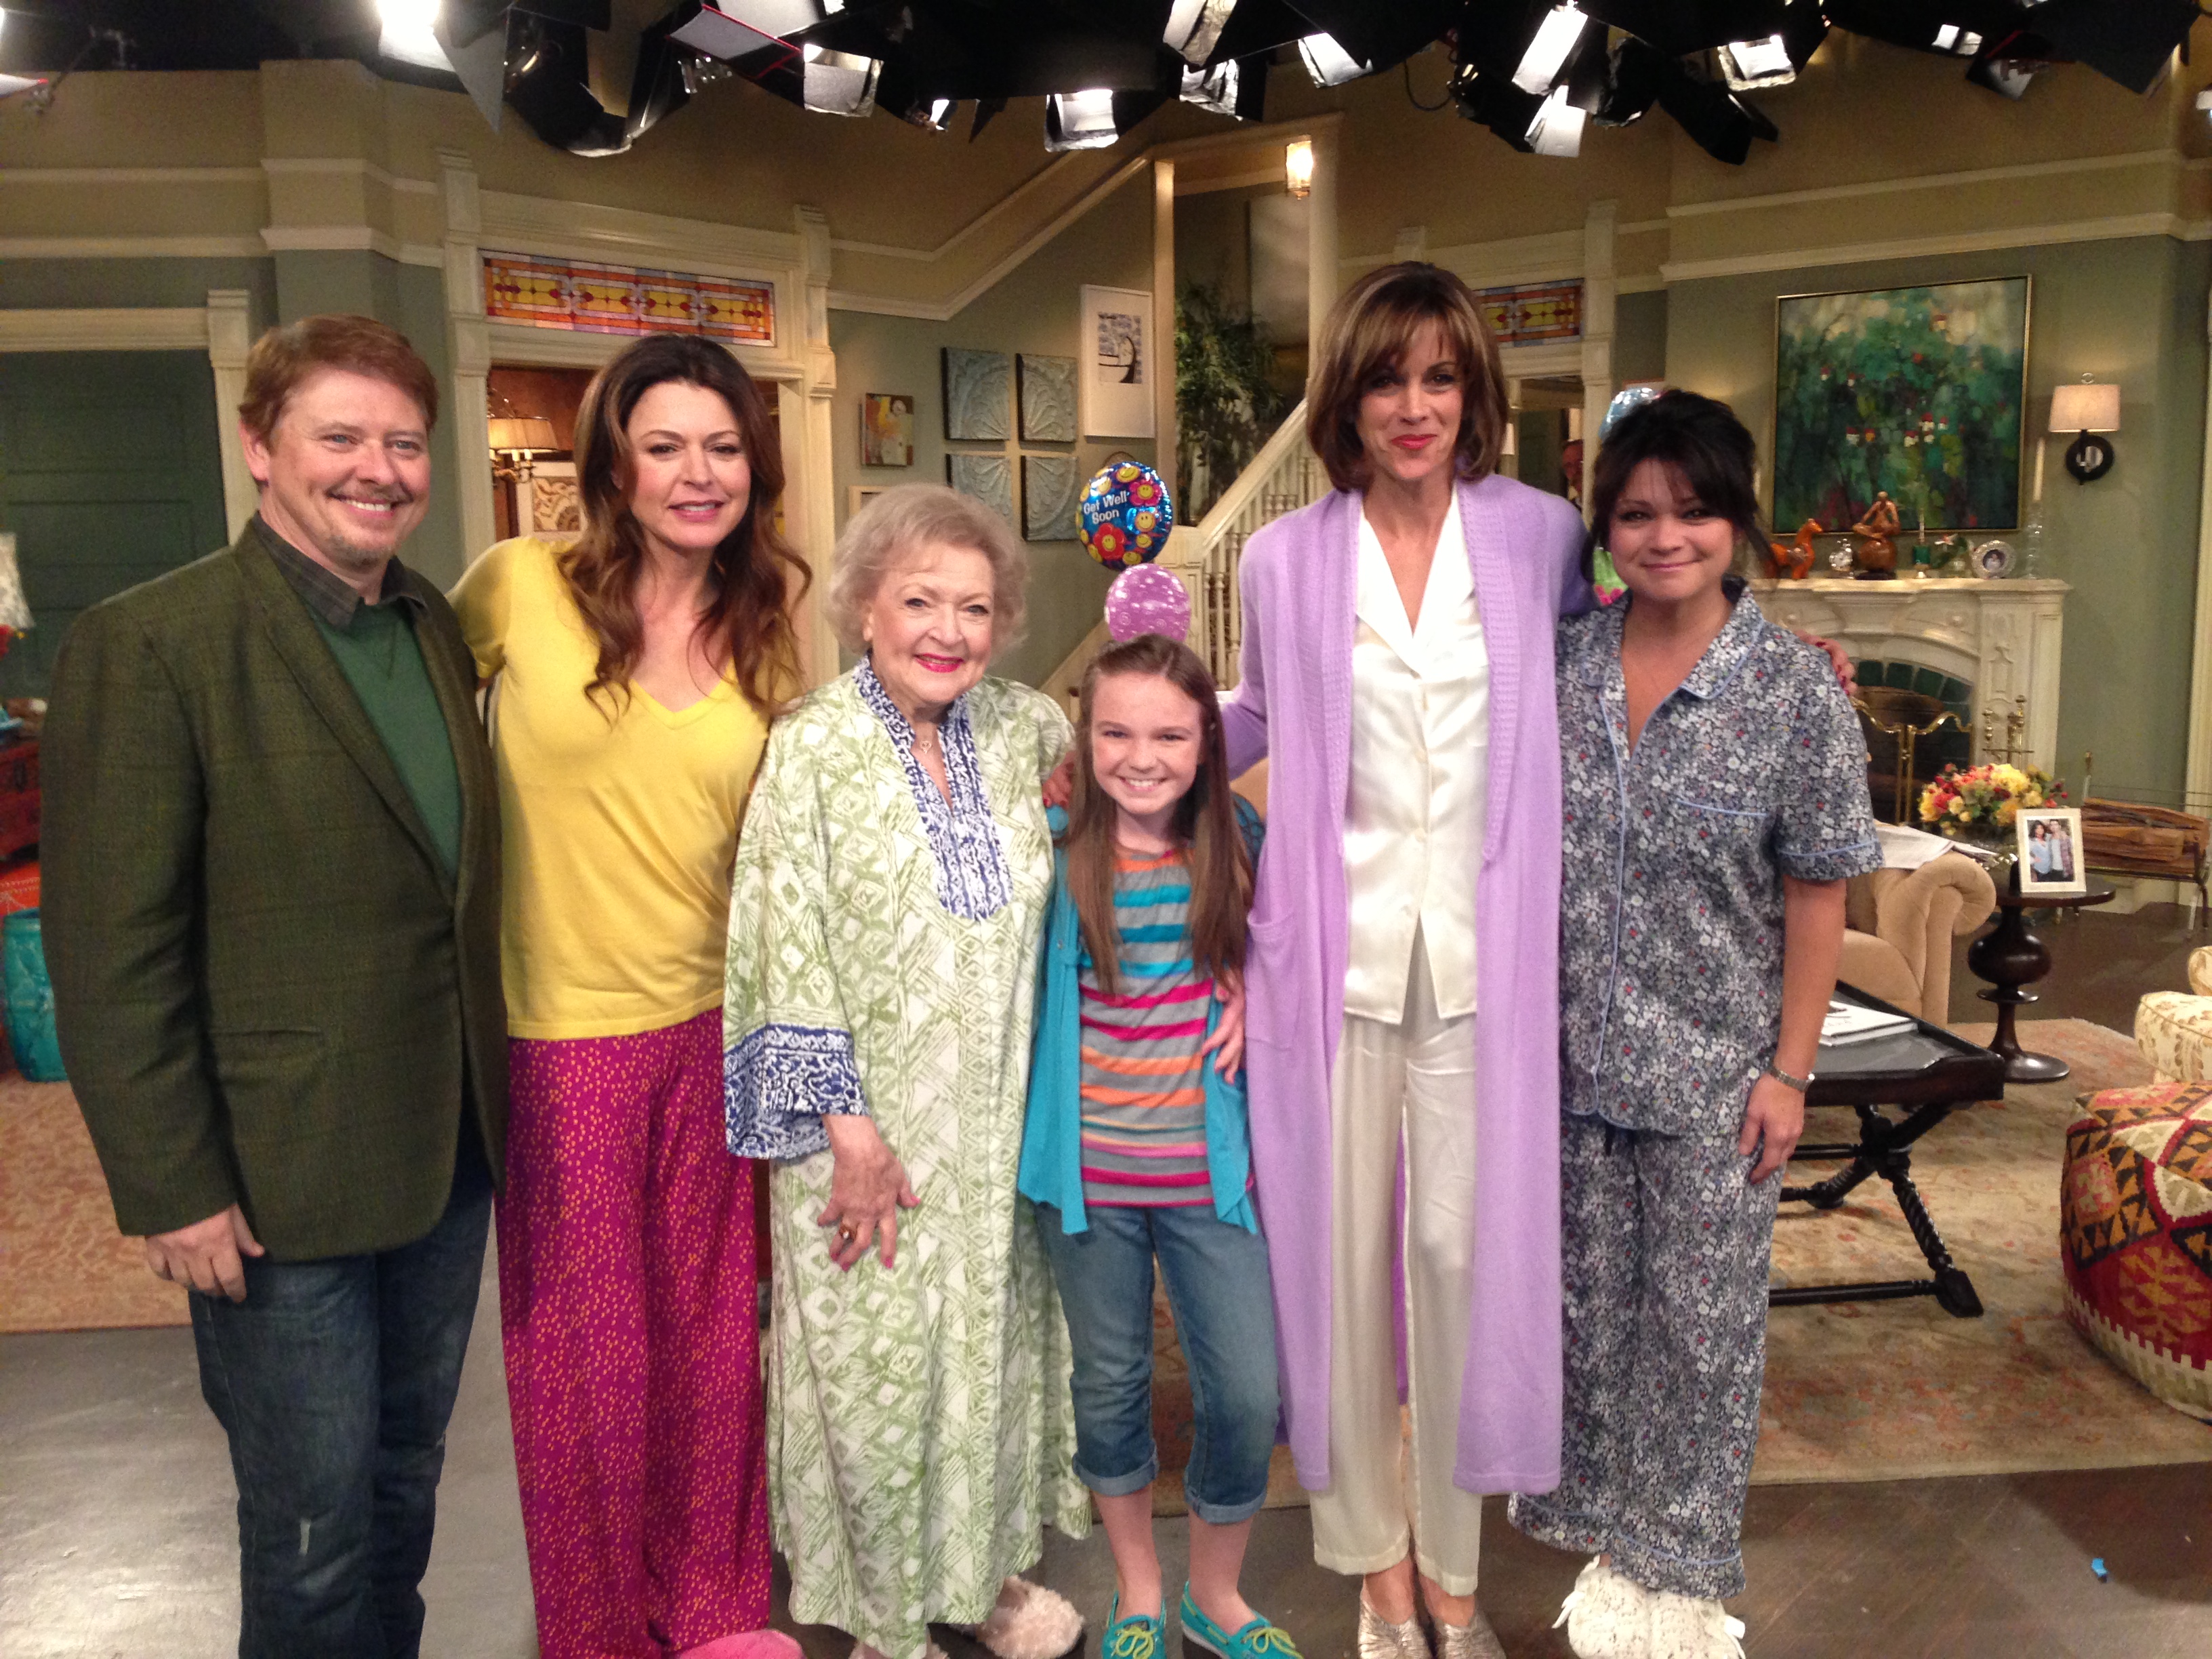 On the set of Hot in Cleveland with Dave Foley, Jane Leeves, Betty White, Wendie Malick, Valerie Bertinelli